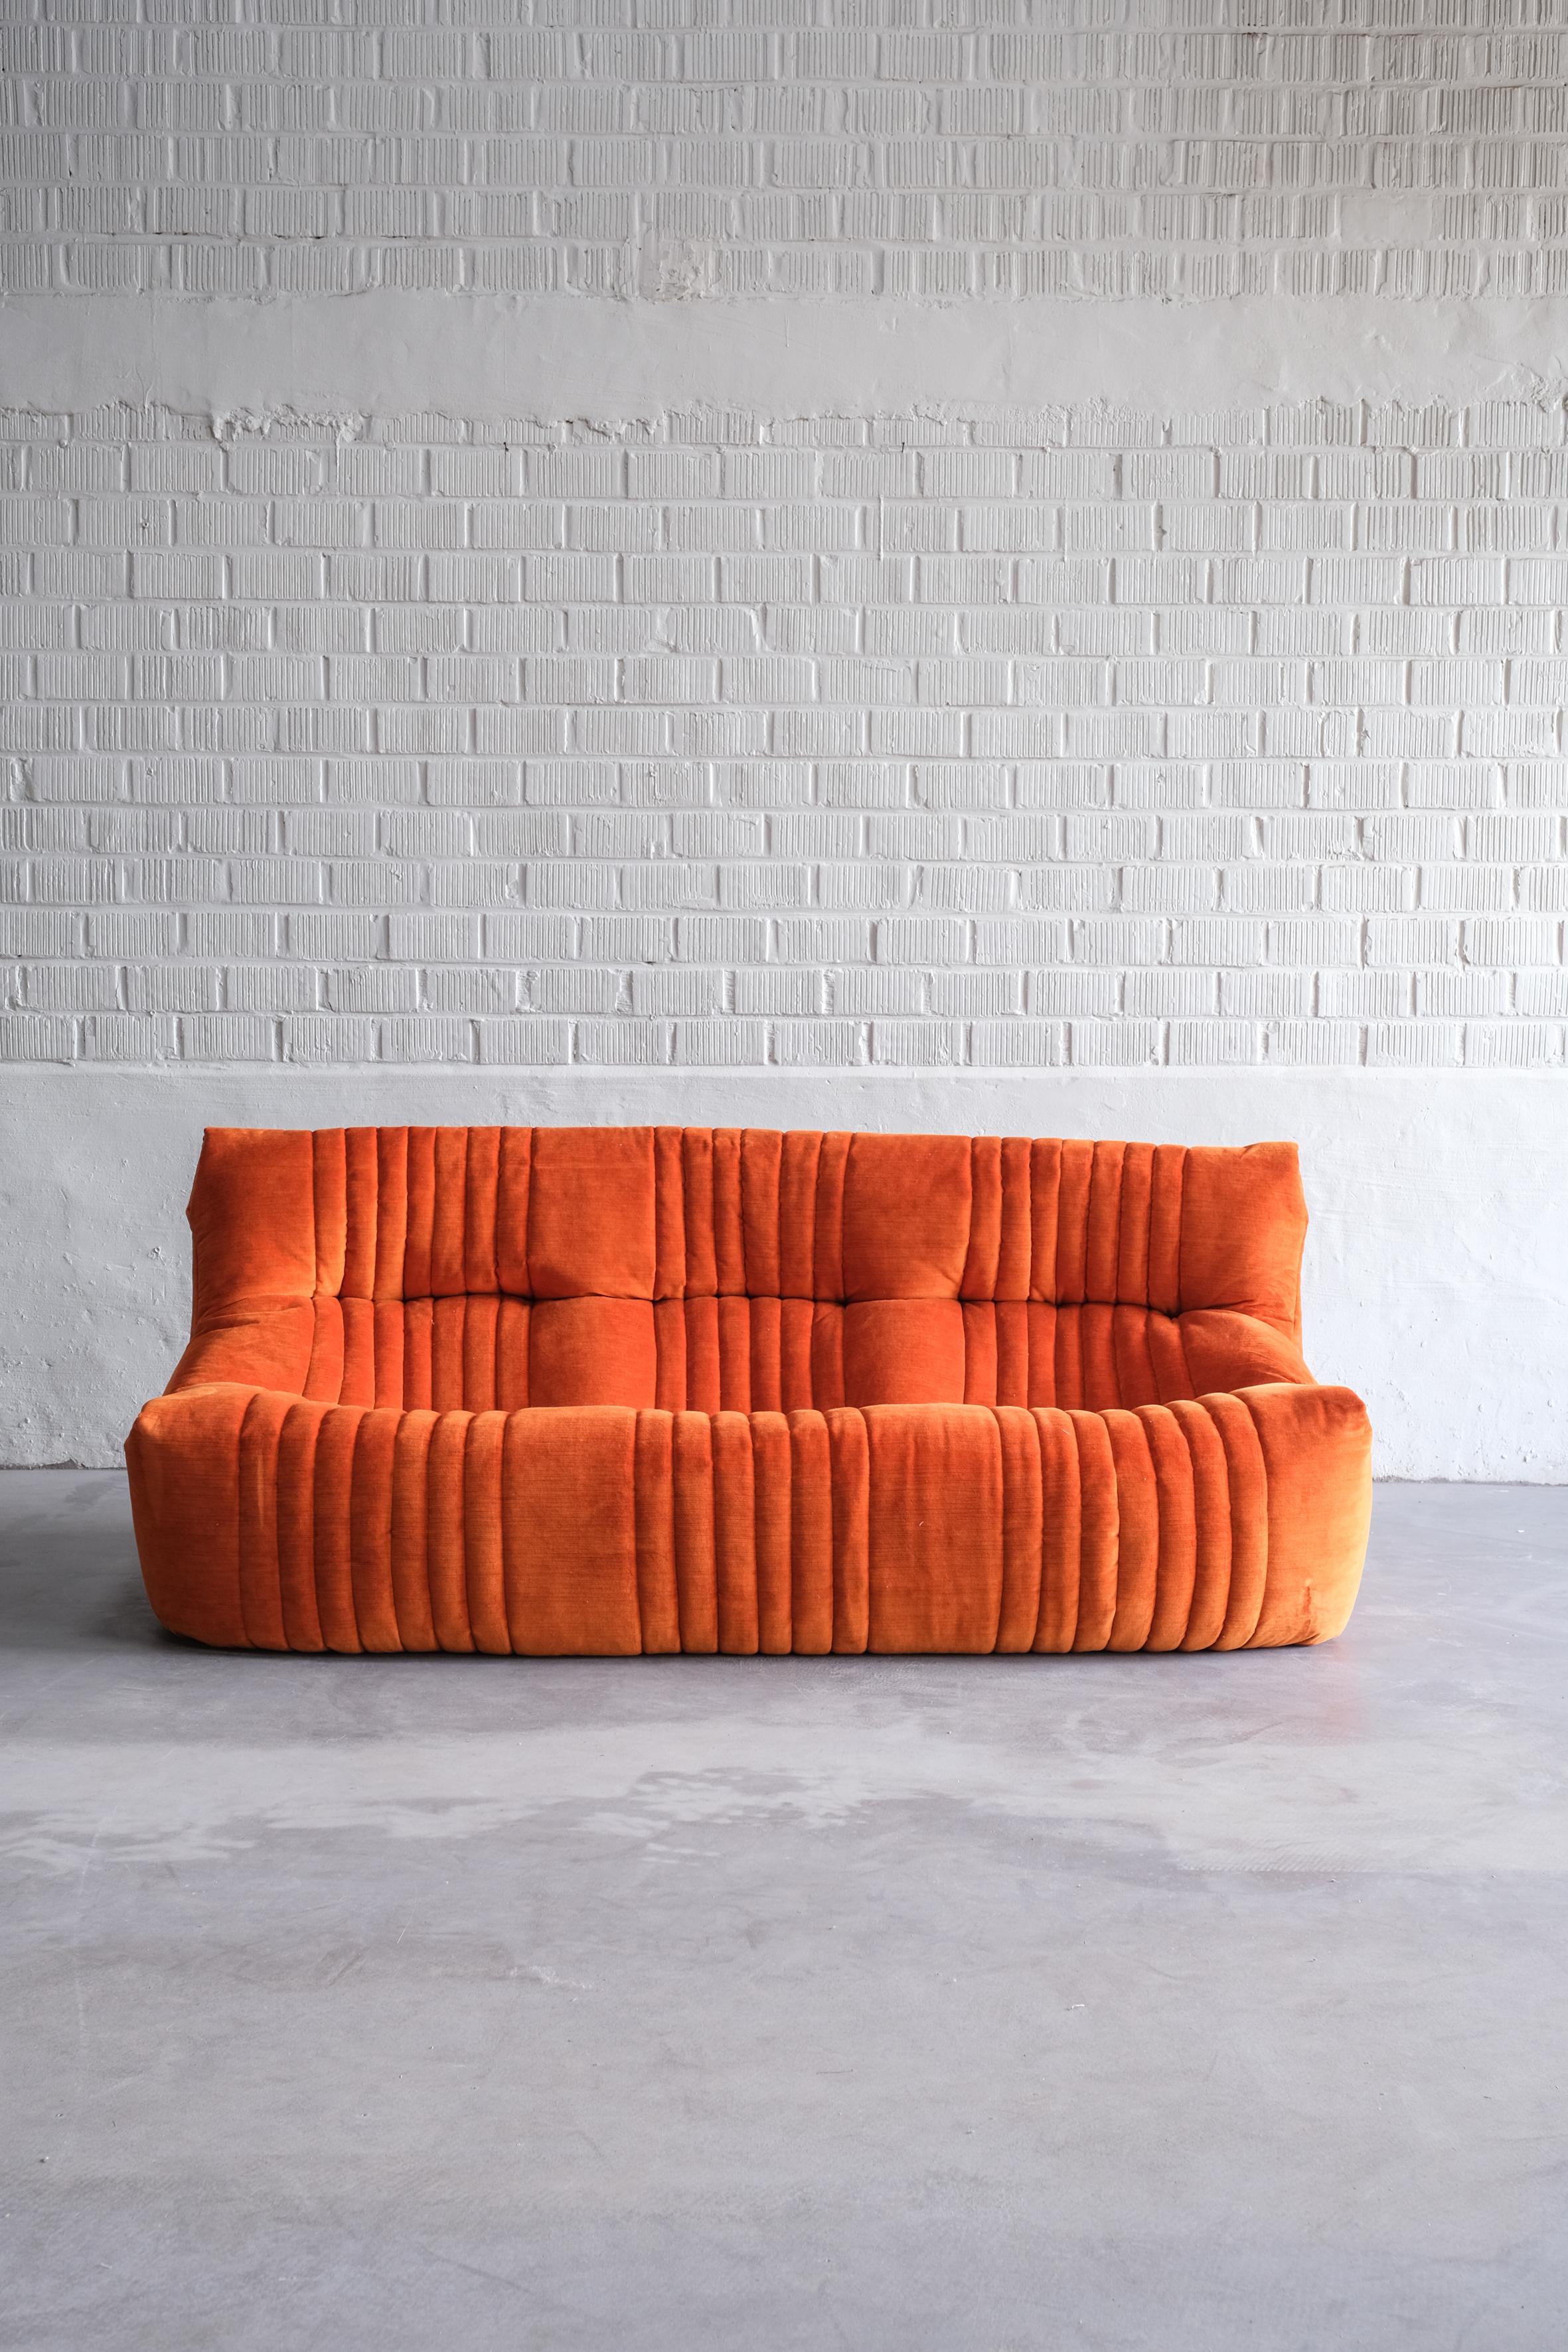 This model was designed by Michel Ducaroy for Ligne Roset also known for creating designs like the Togo, Kashima and Marsalla sofa. 

Extremely comfortable sofa.